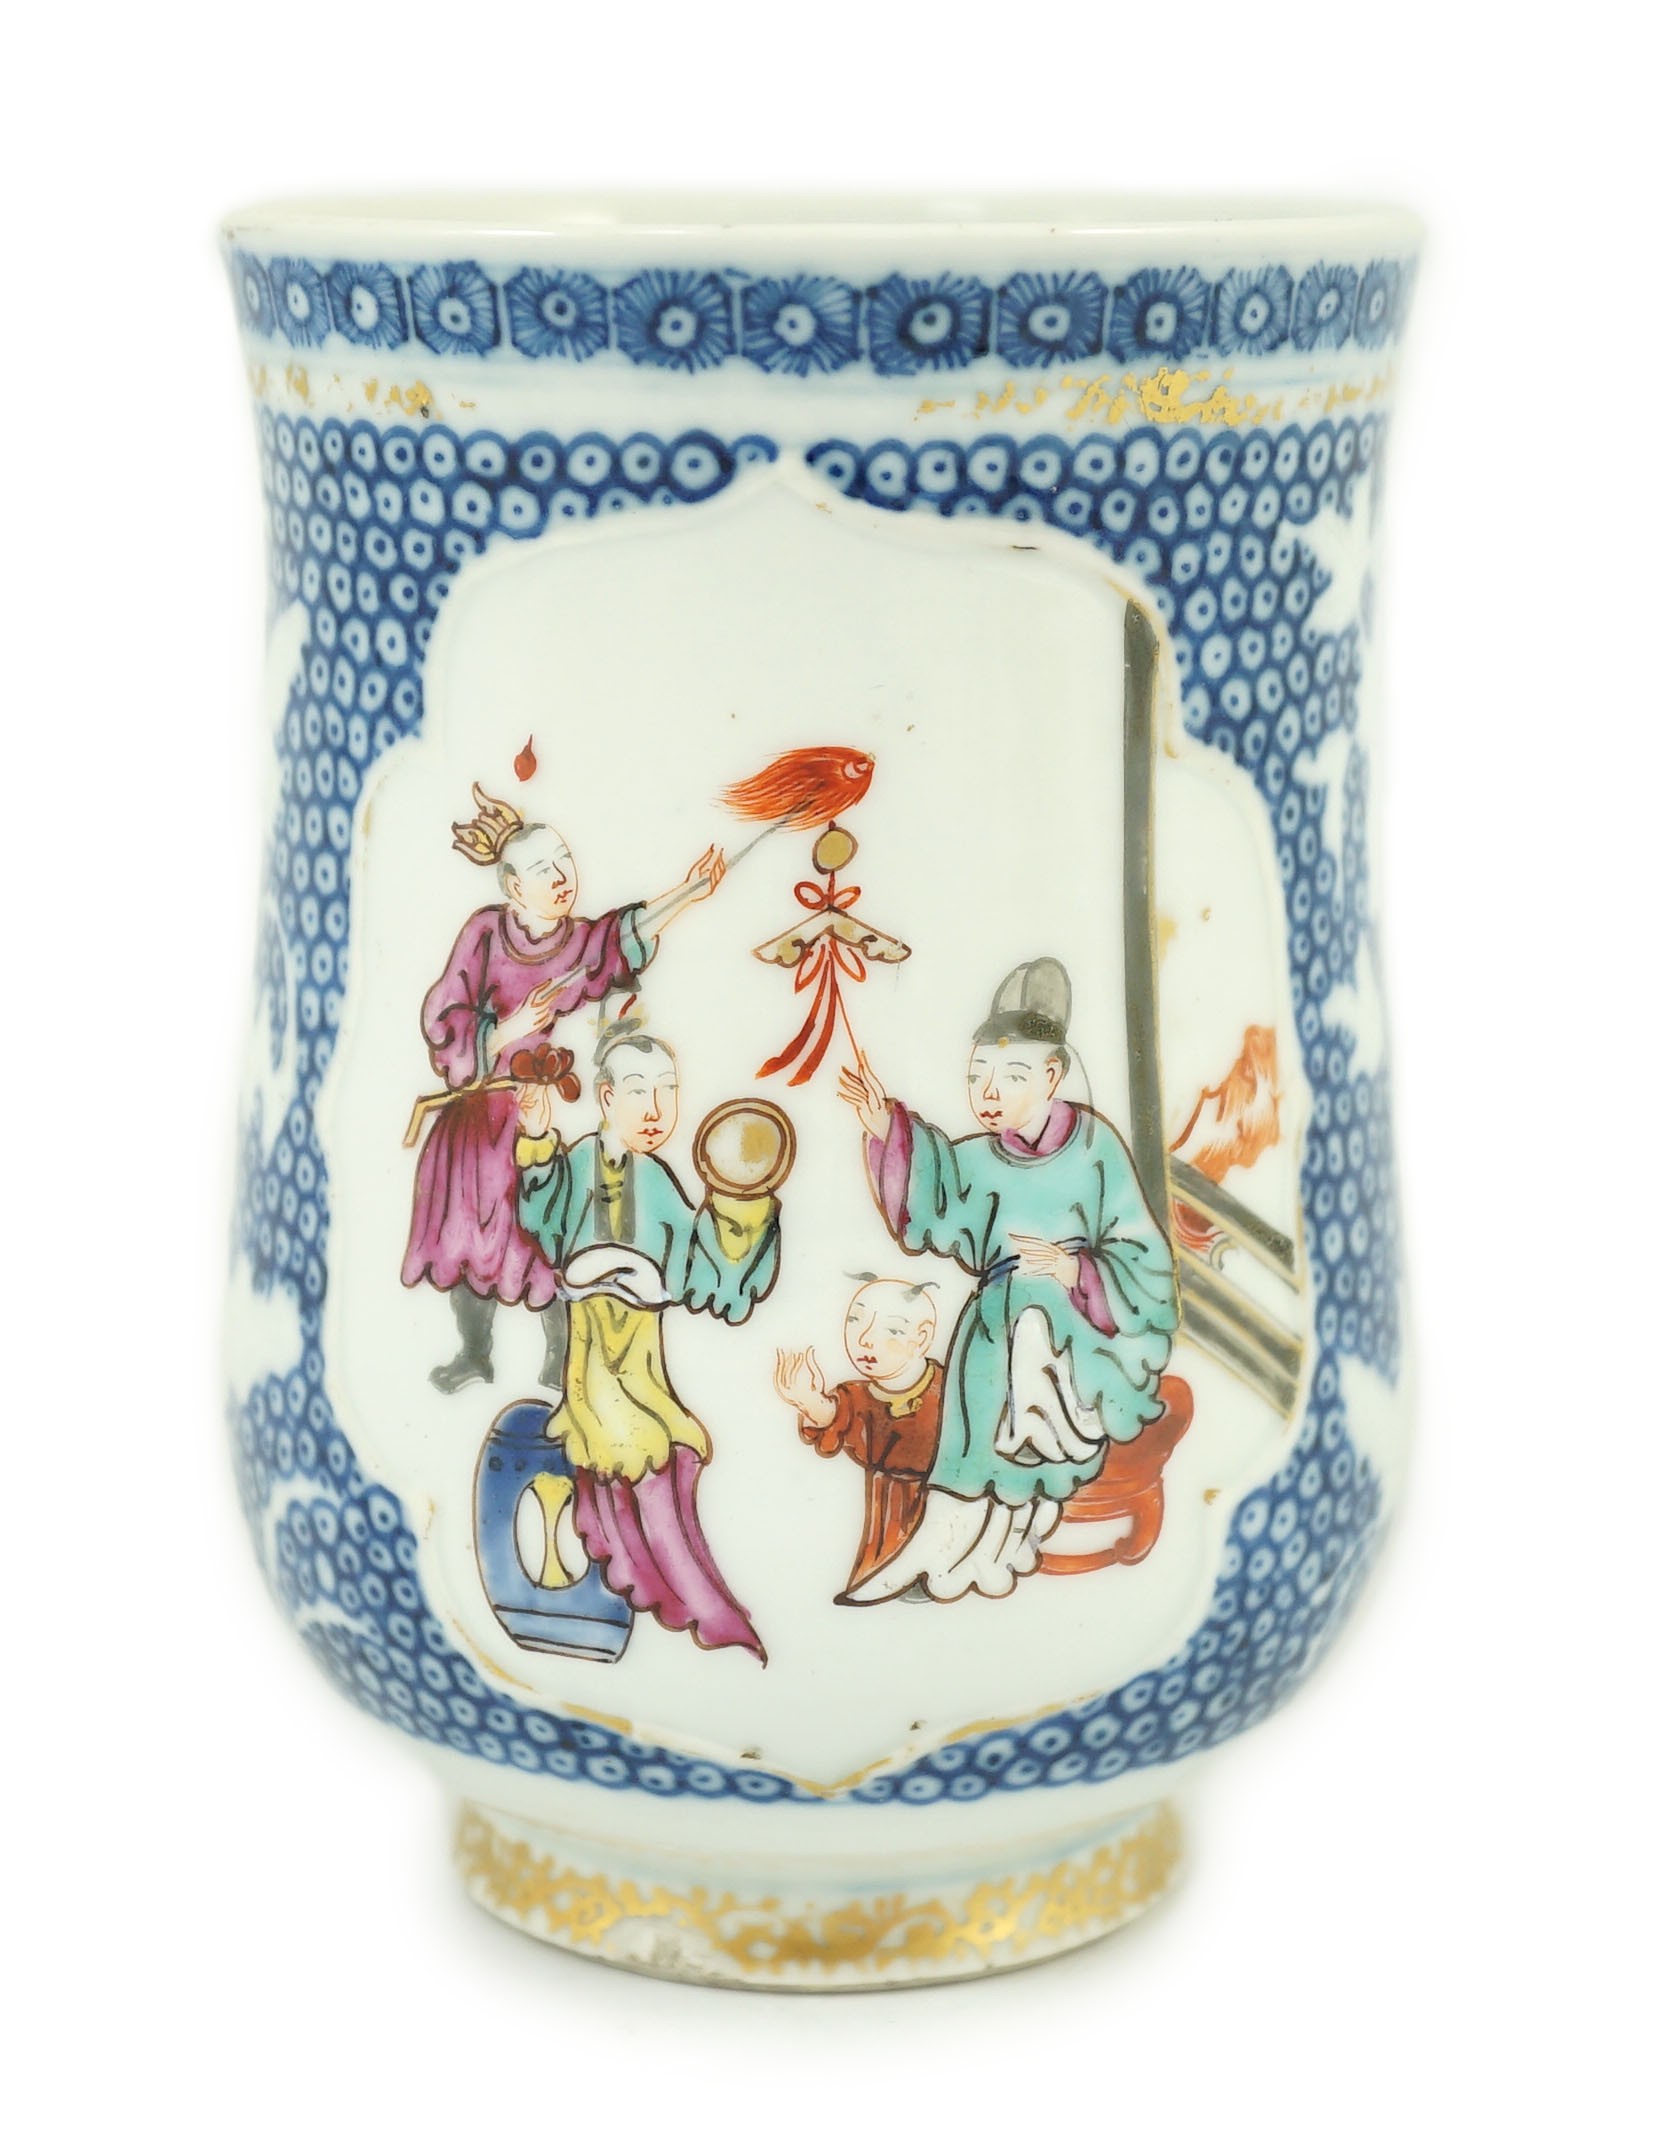 An 18th century Chinese export famille rose mug, 11.5cm